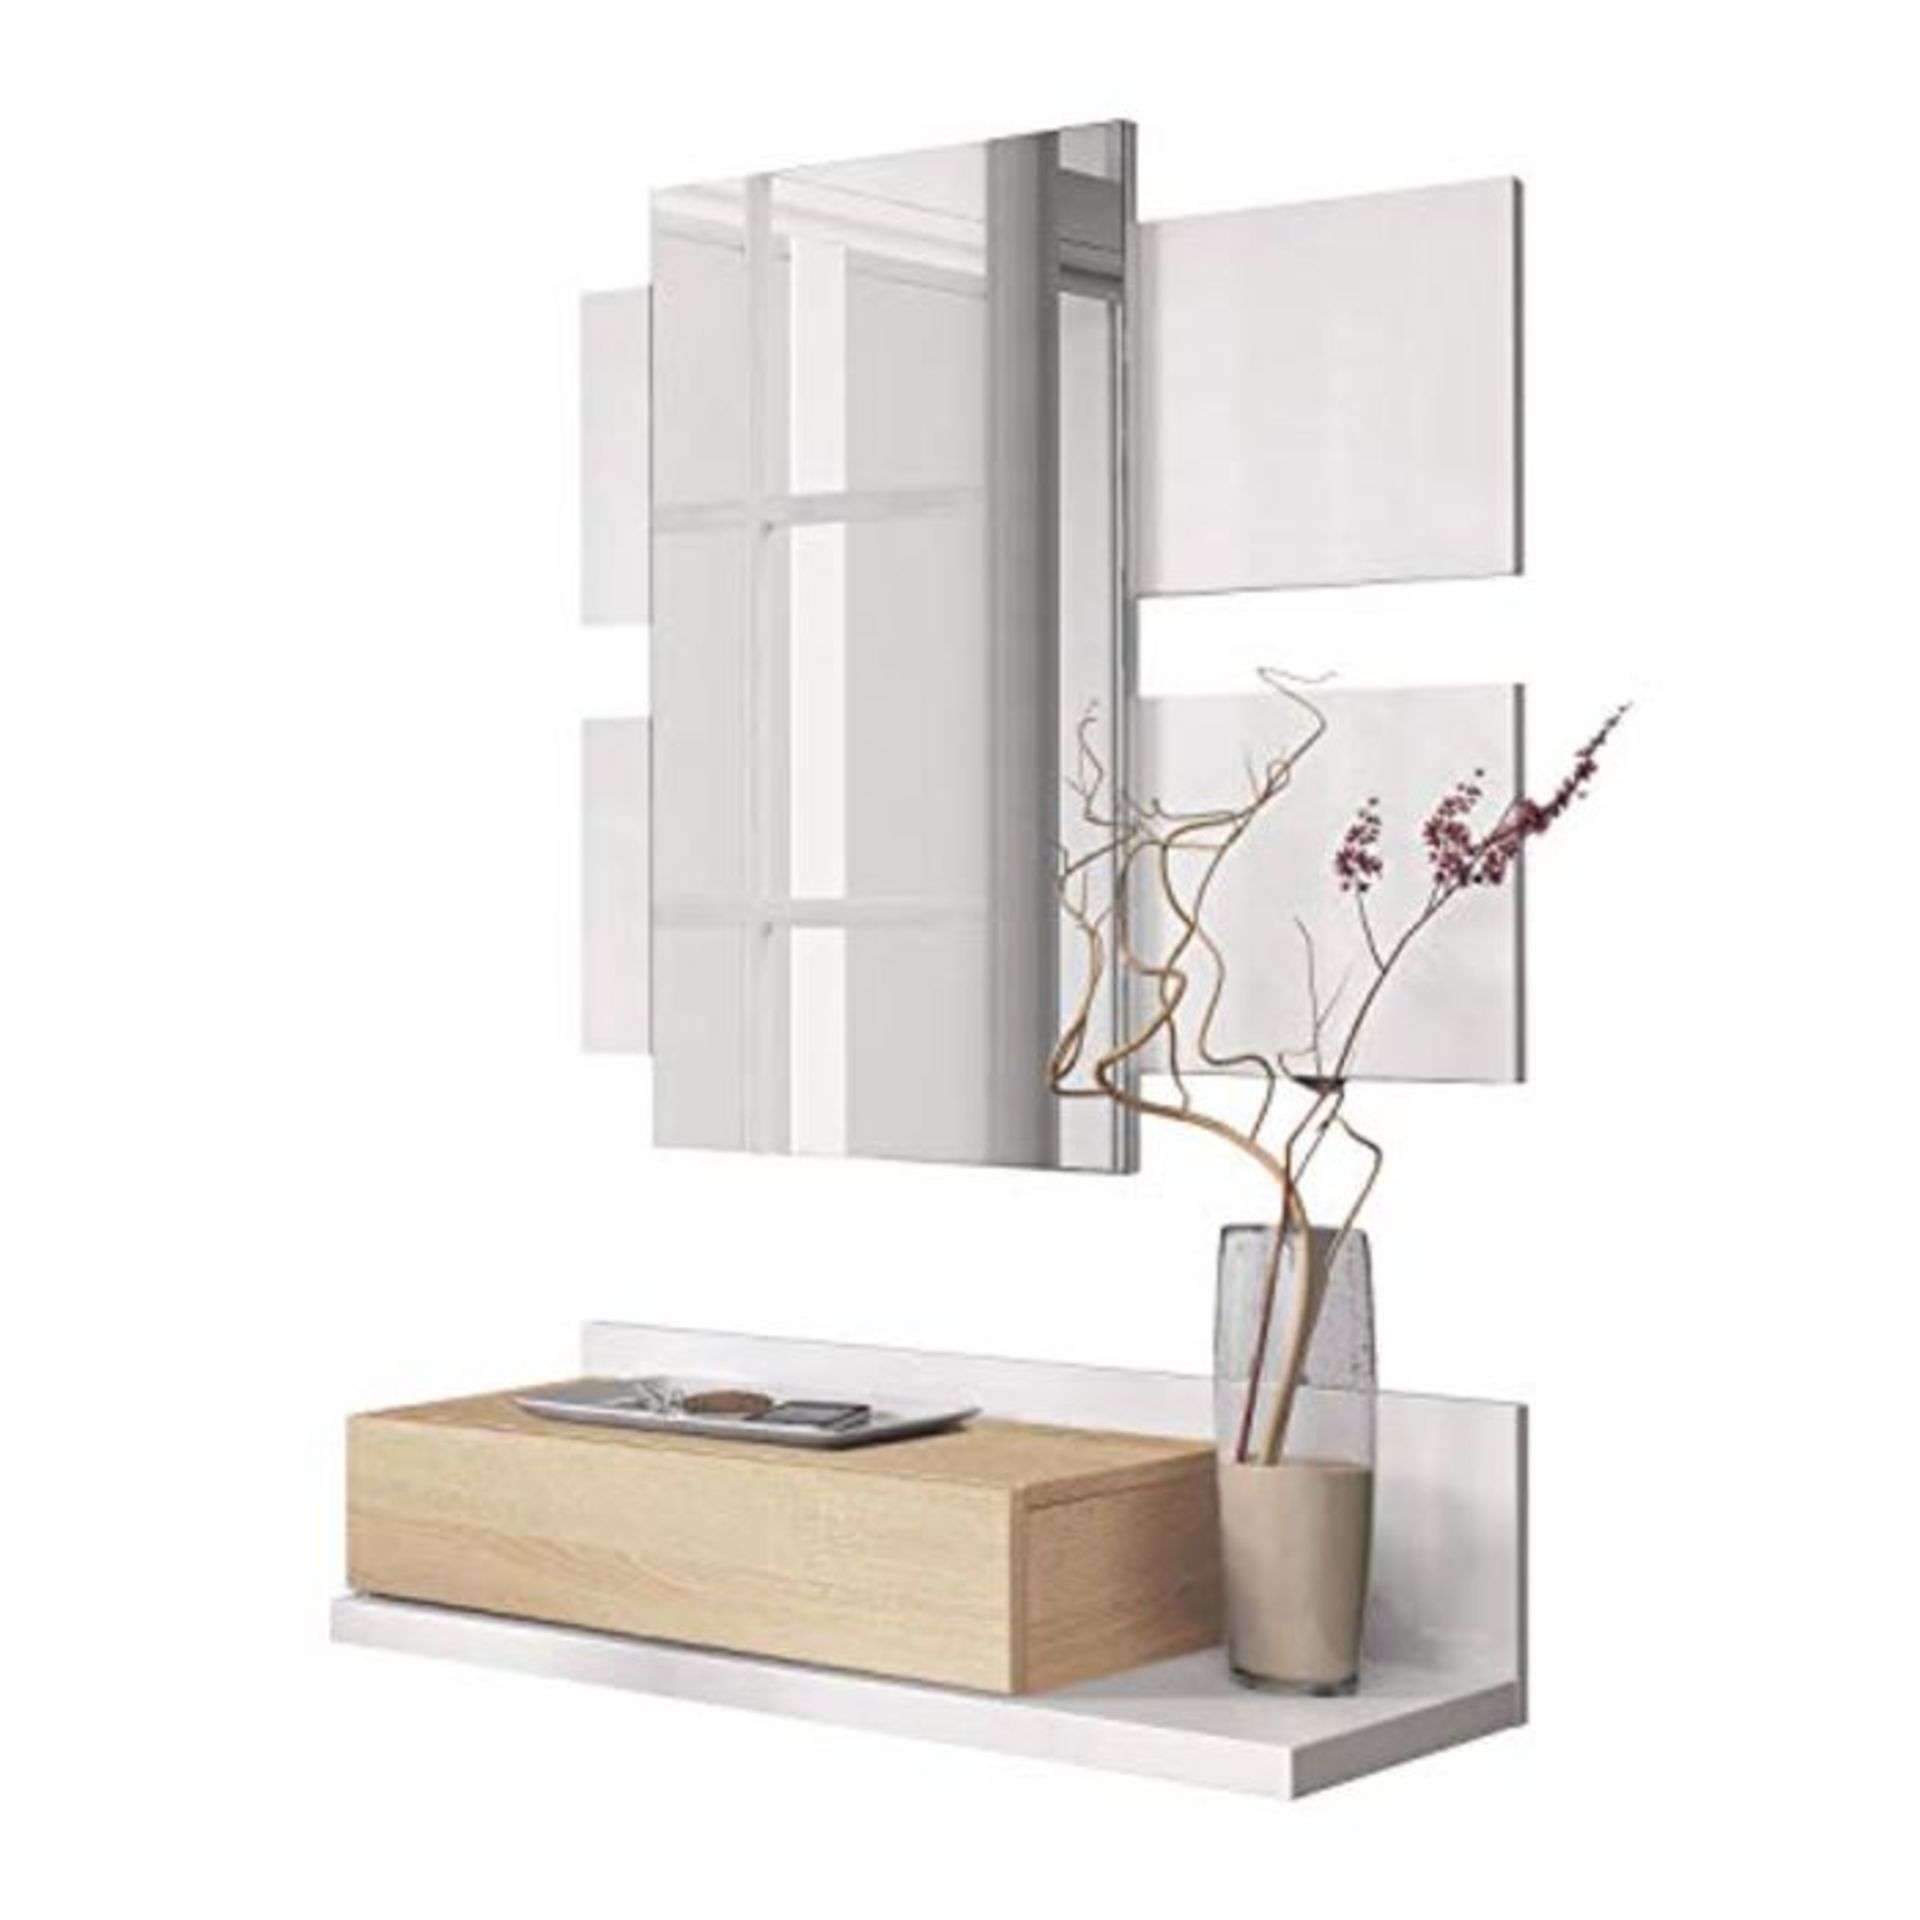 RRP £85.00 Hallway with drawer and mirror, Entrance Furniture, Tekkan Model, Finished in Artik Wh